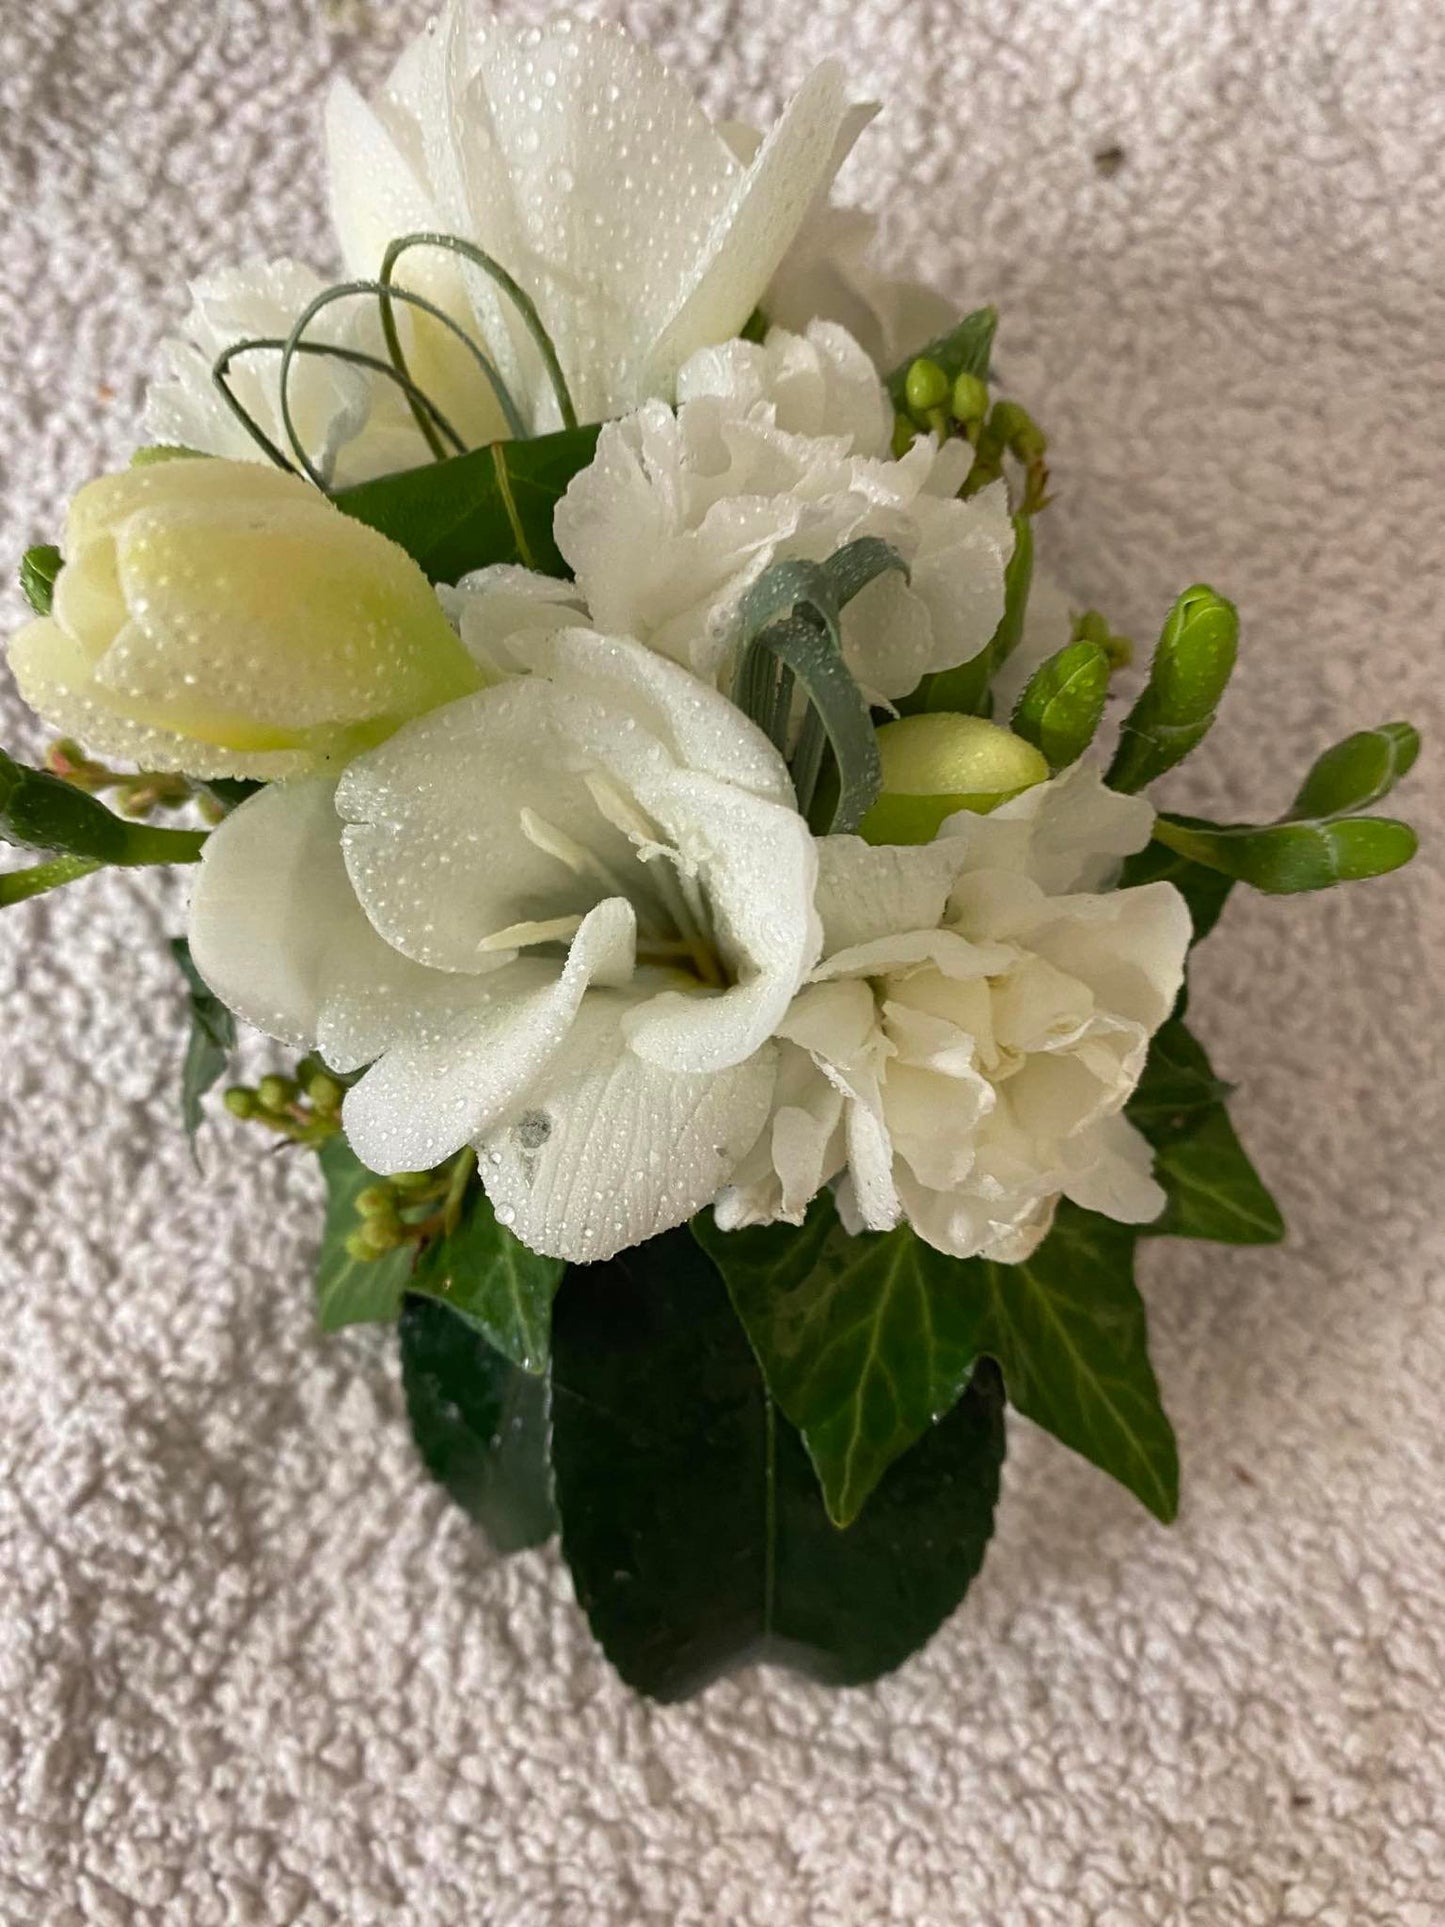 A gorgeous wrist corsage made with white flowers and interesting green foliage to complement any outfit.